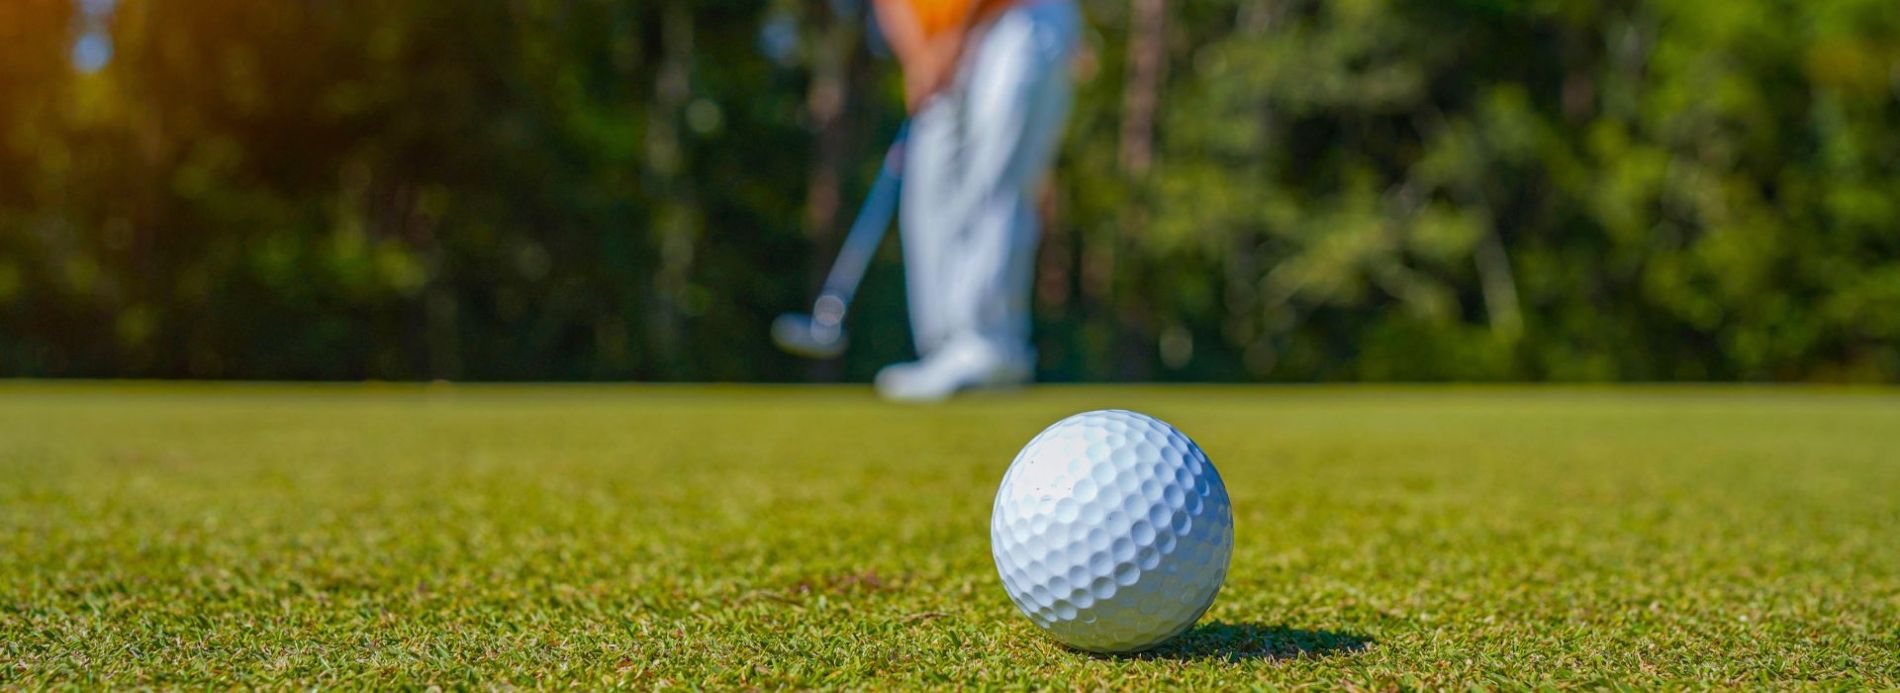 Fort Walton Beach Golf Courses to Bring Your “A” Game Feature Image